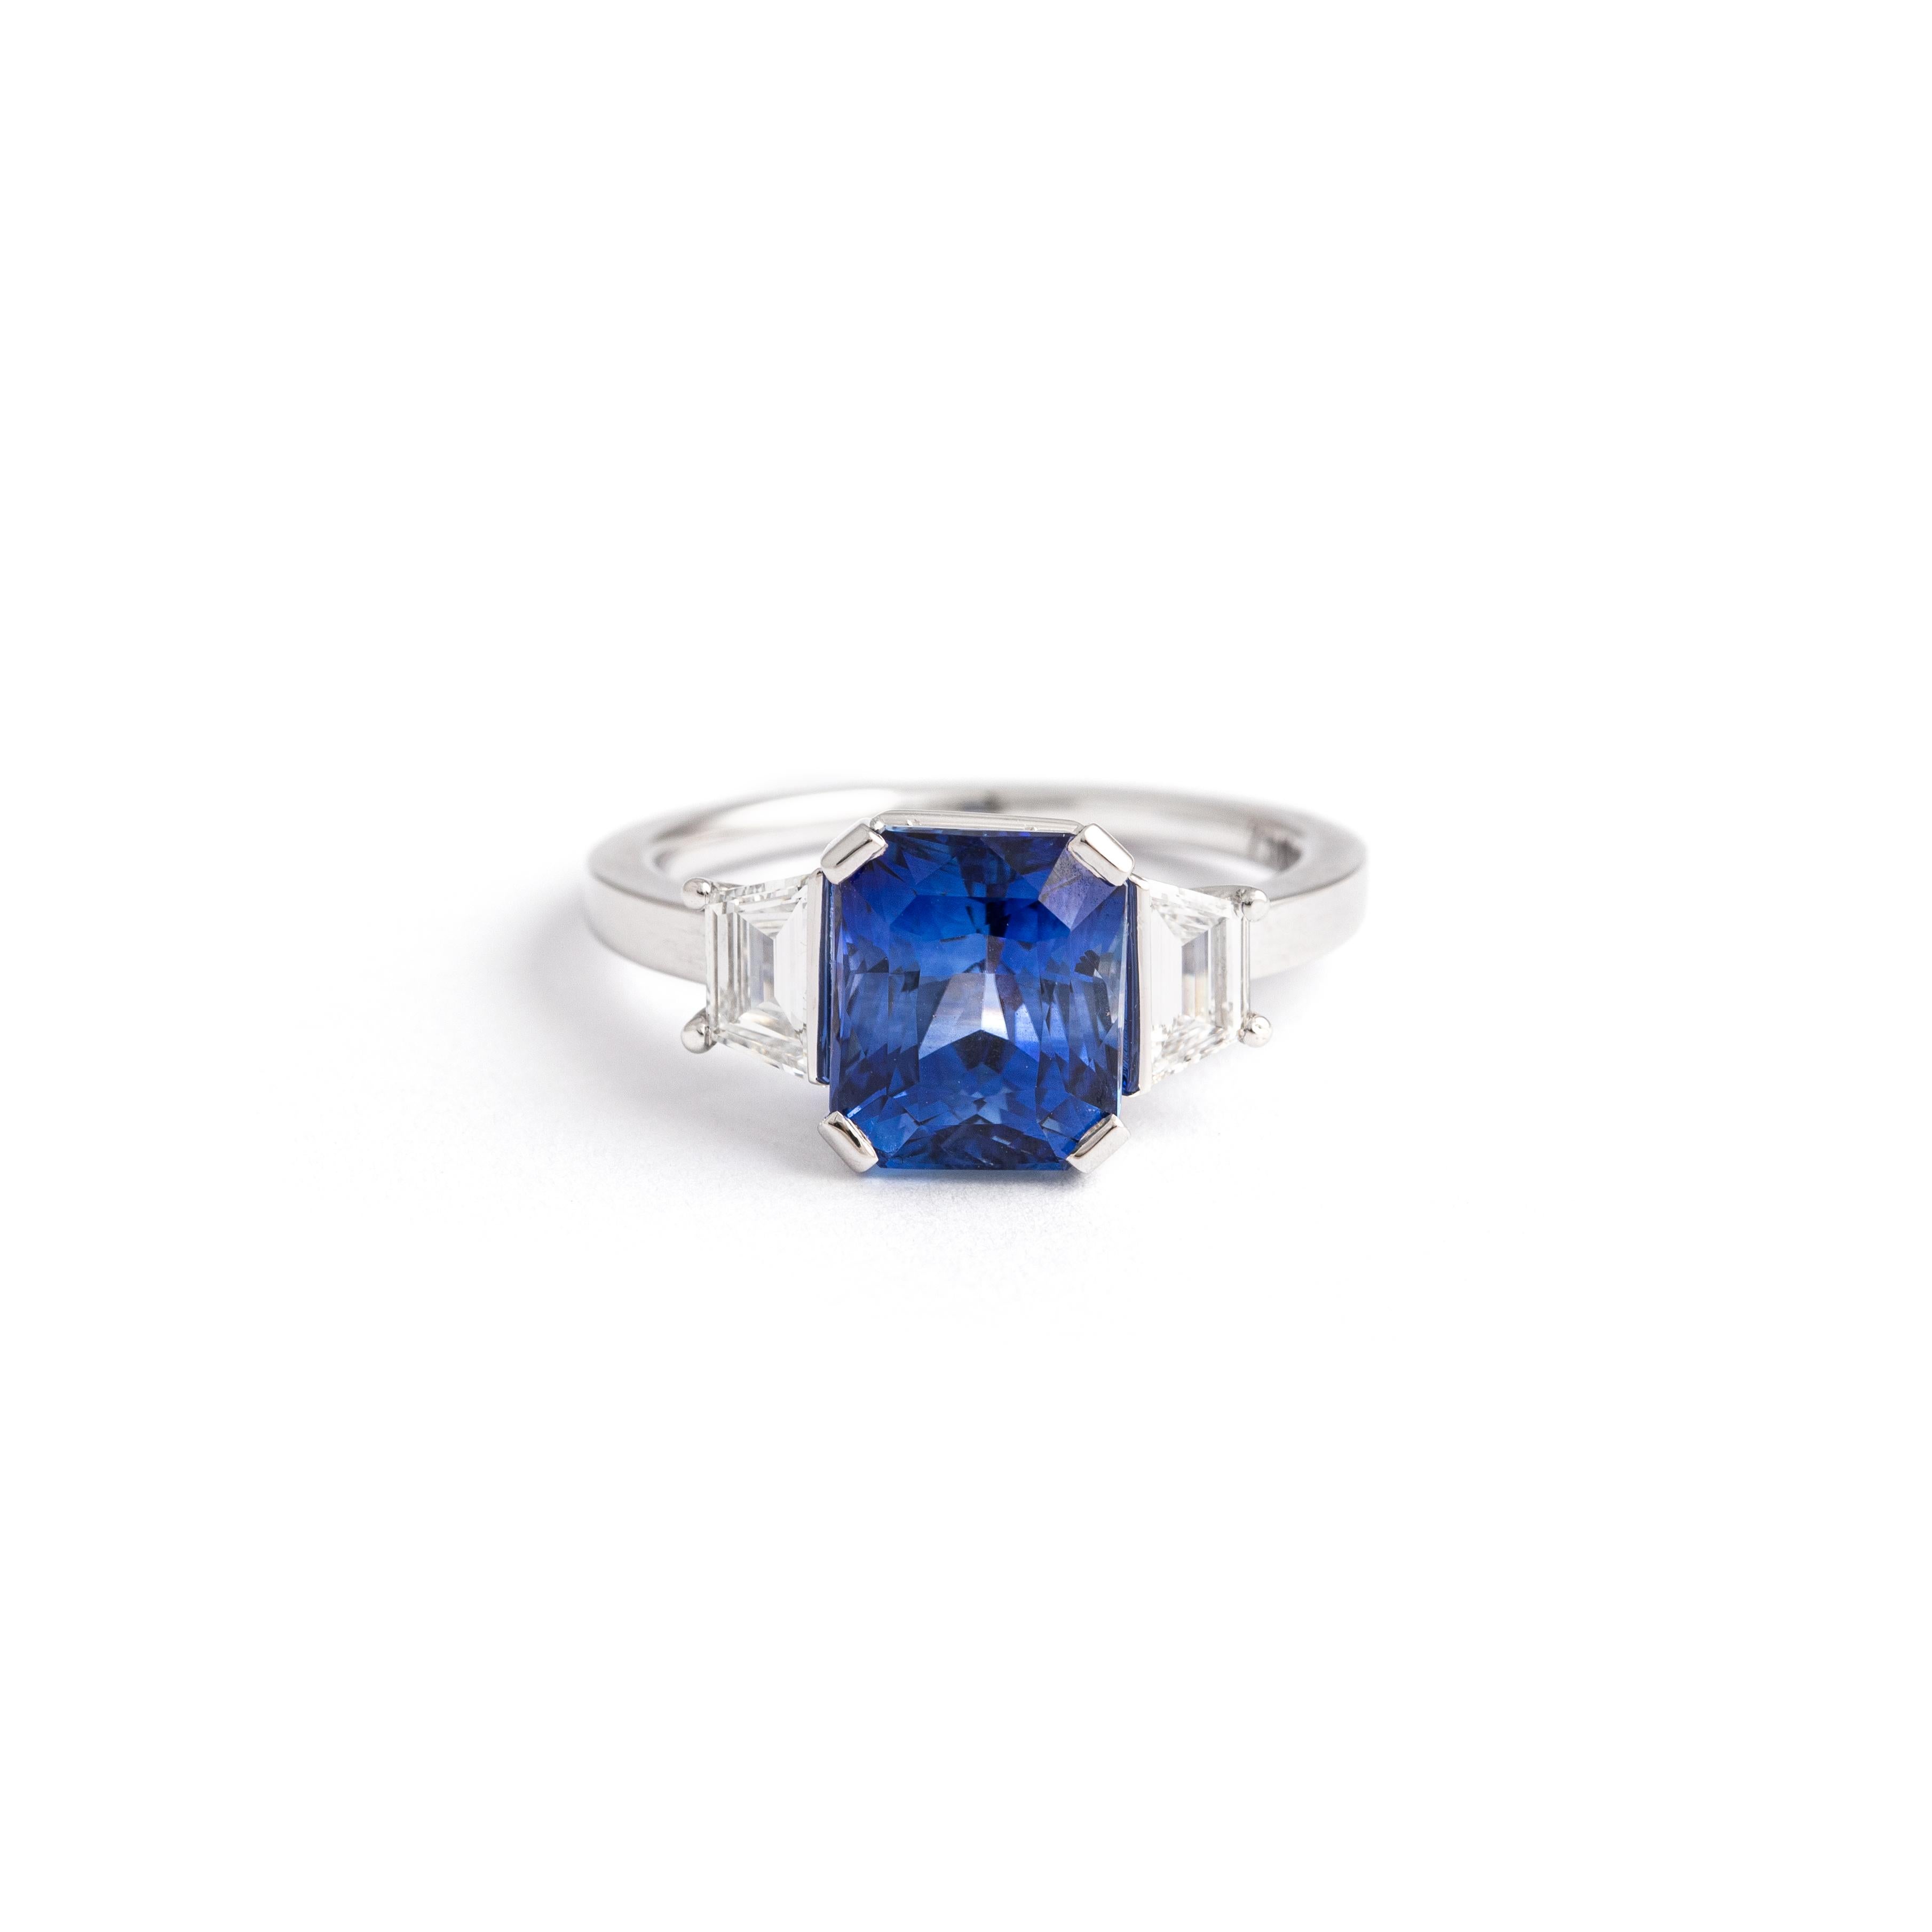 Blue Sapphire/ stunning ring 4.05 carat, Swiss laboratory certificate (Ggtl) heated, flanked with a paire of trapeze F/VS 0.49 carat mounted on white gold.

Weight: 4.03 grams.
Size: 52